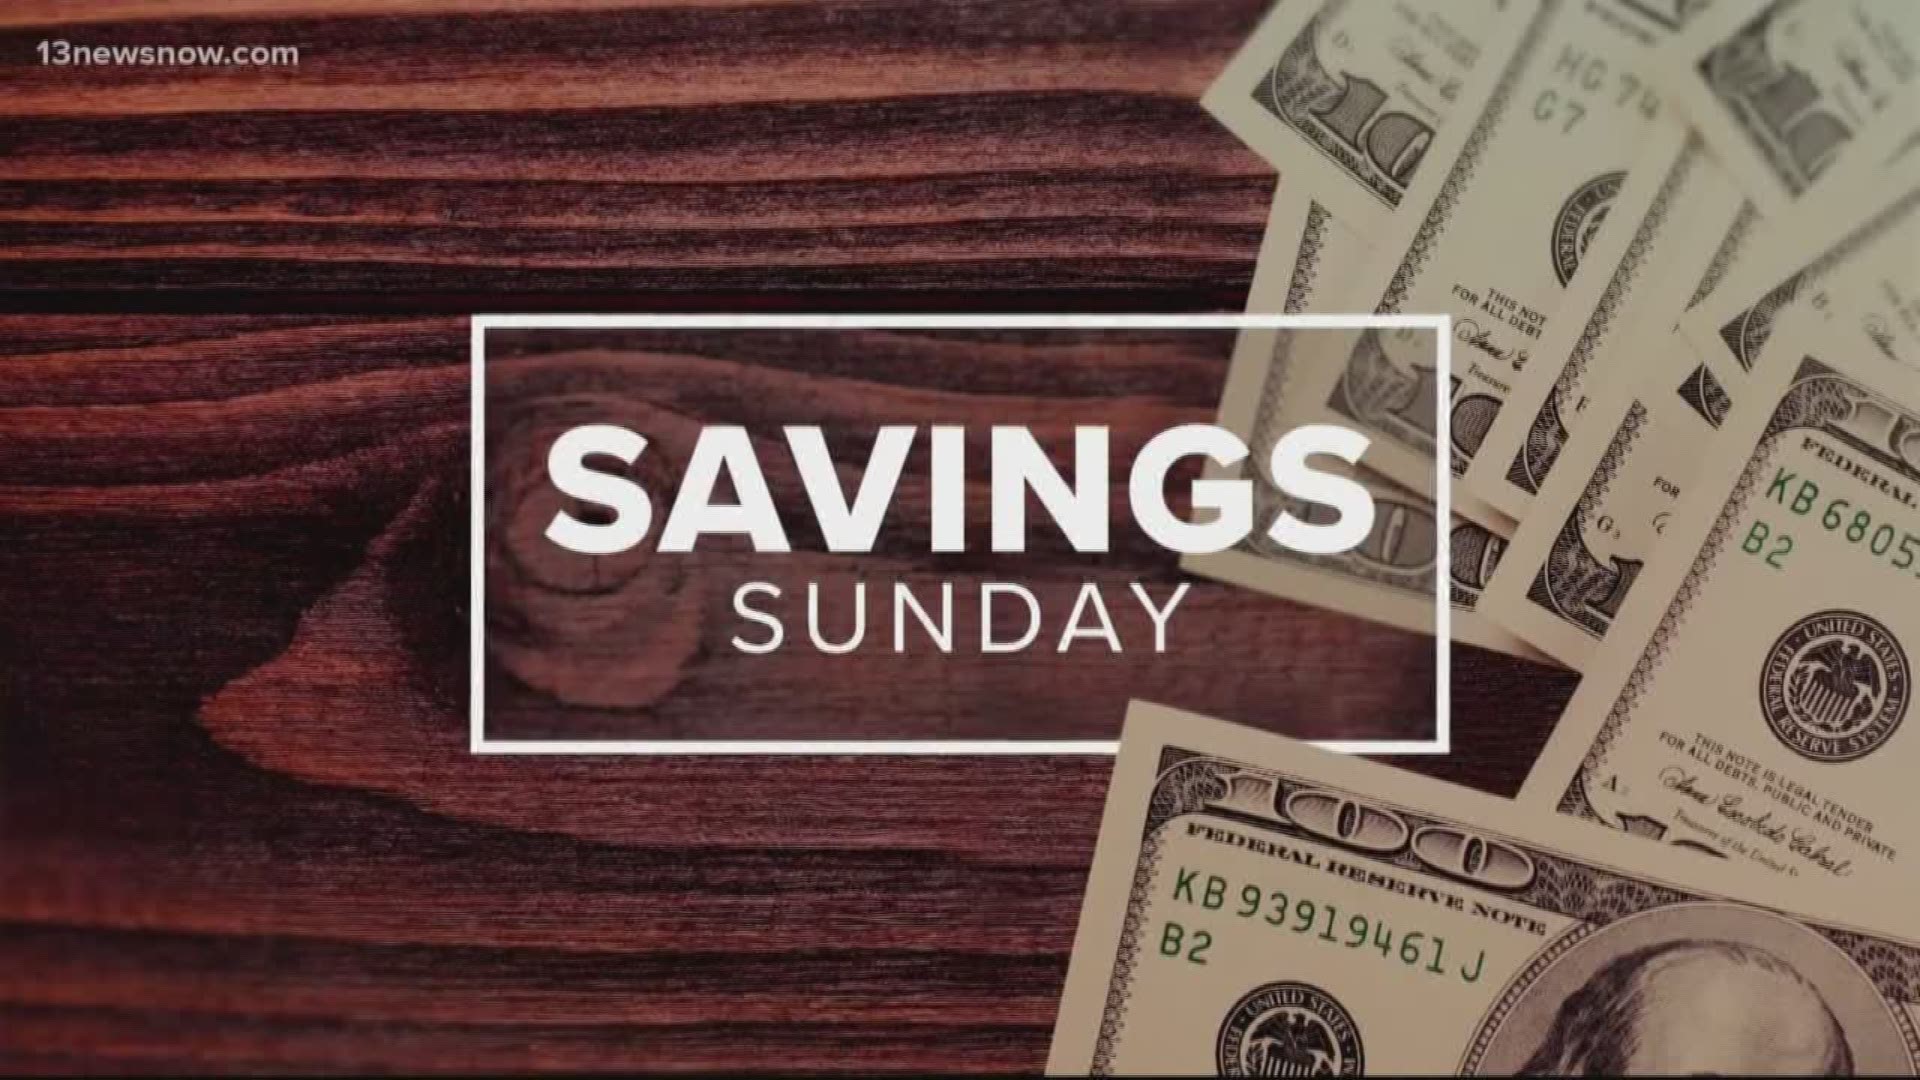 Laura Oliver from www.afrugalchick.com has your big savings for the week of Aug. 18, 2019.